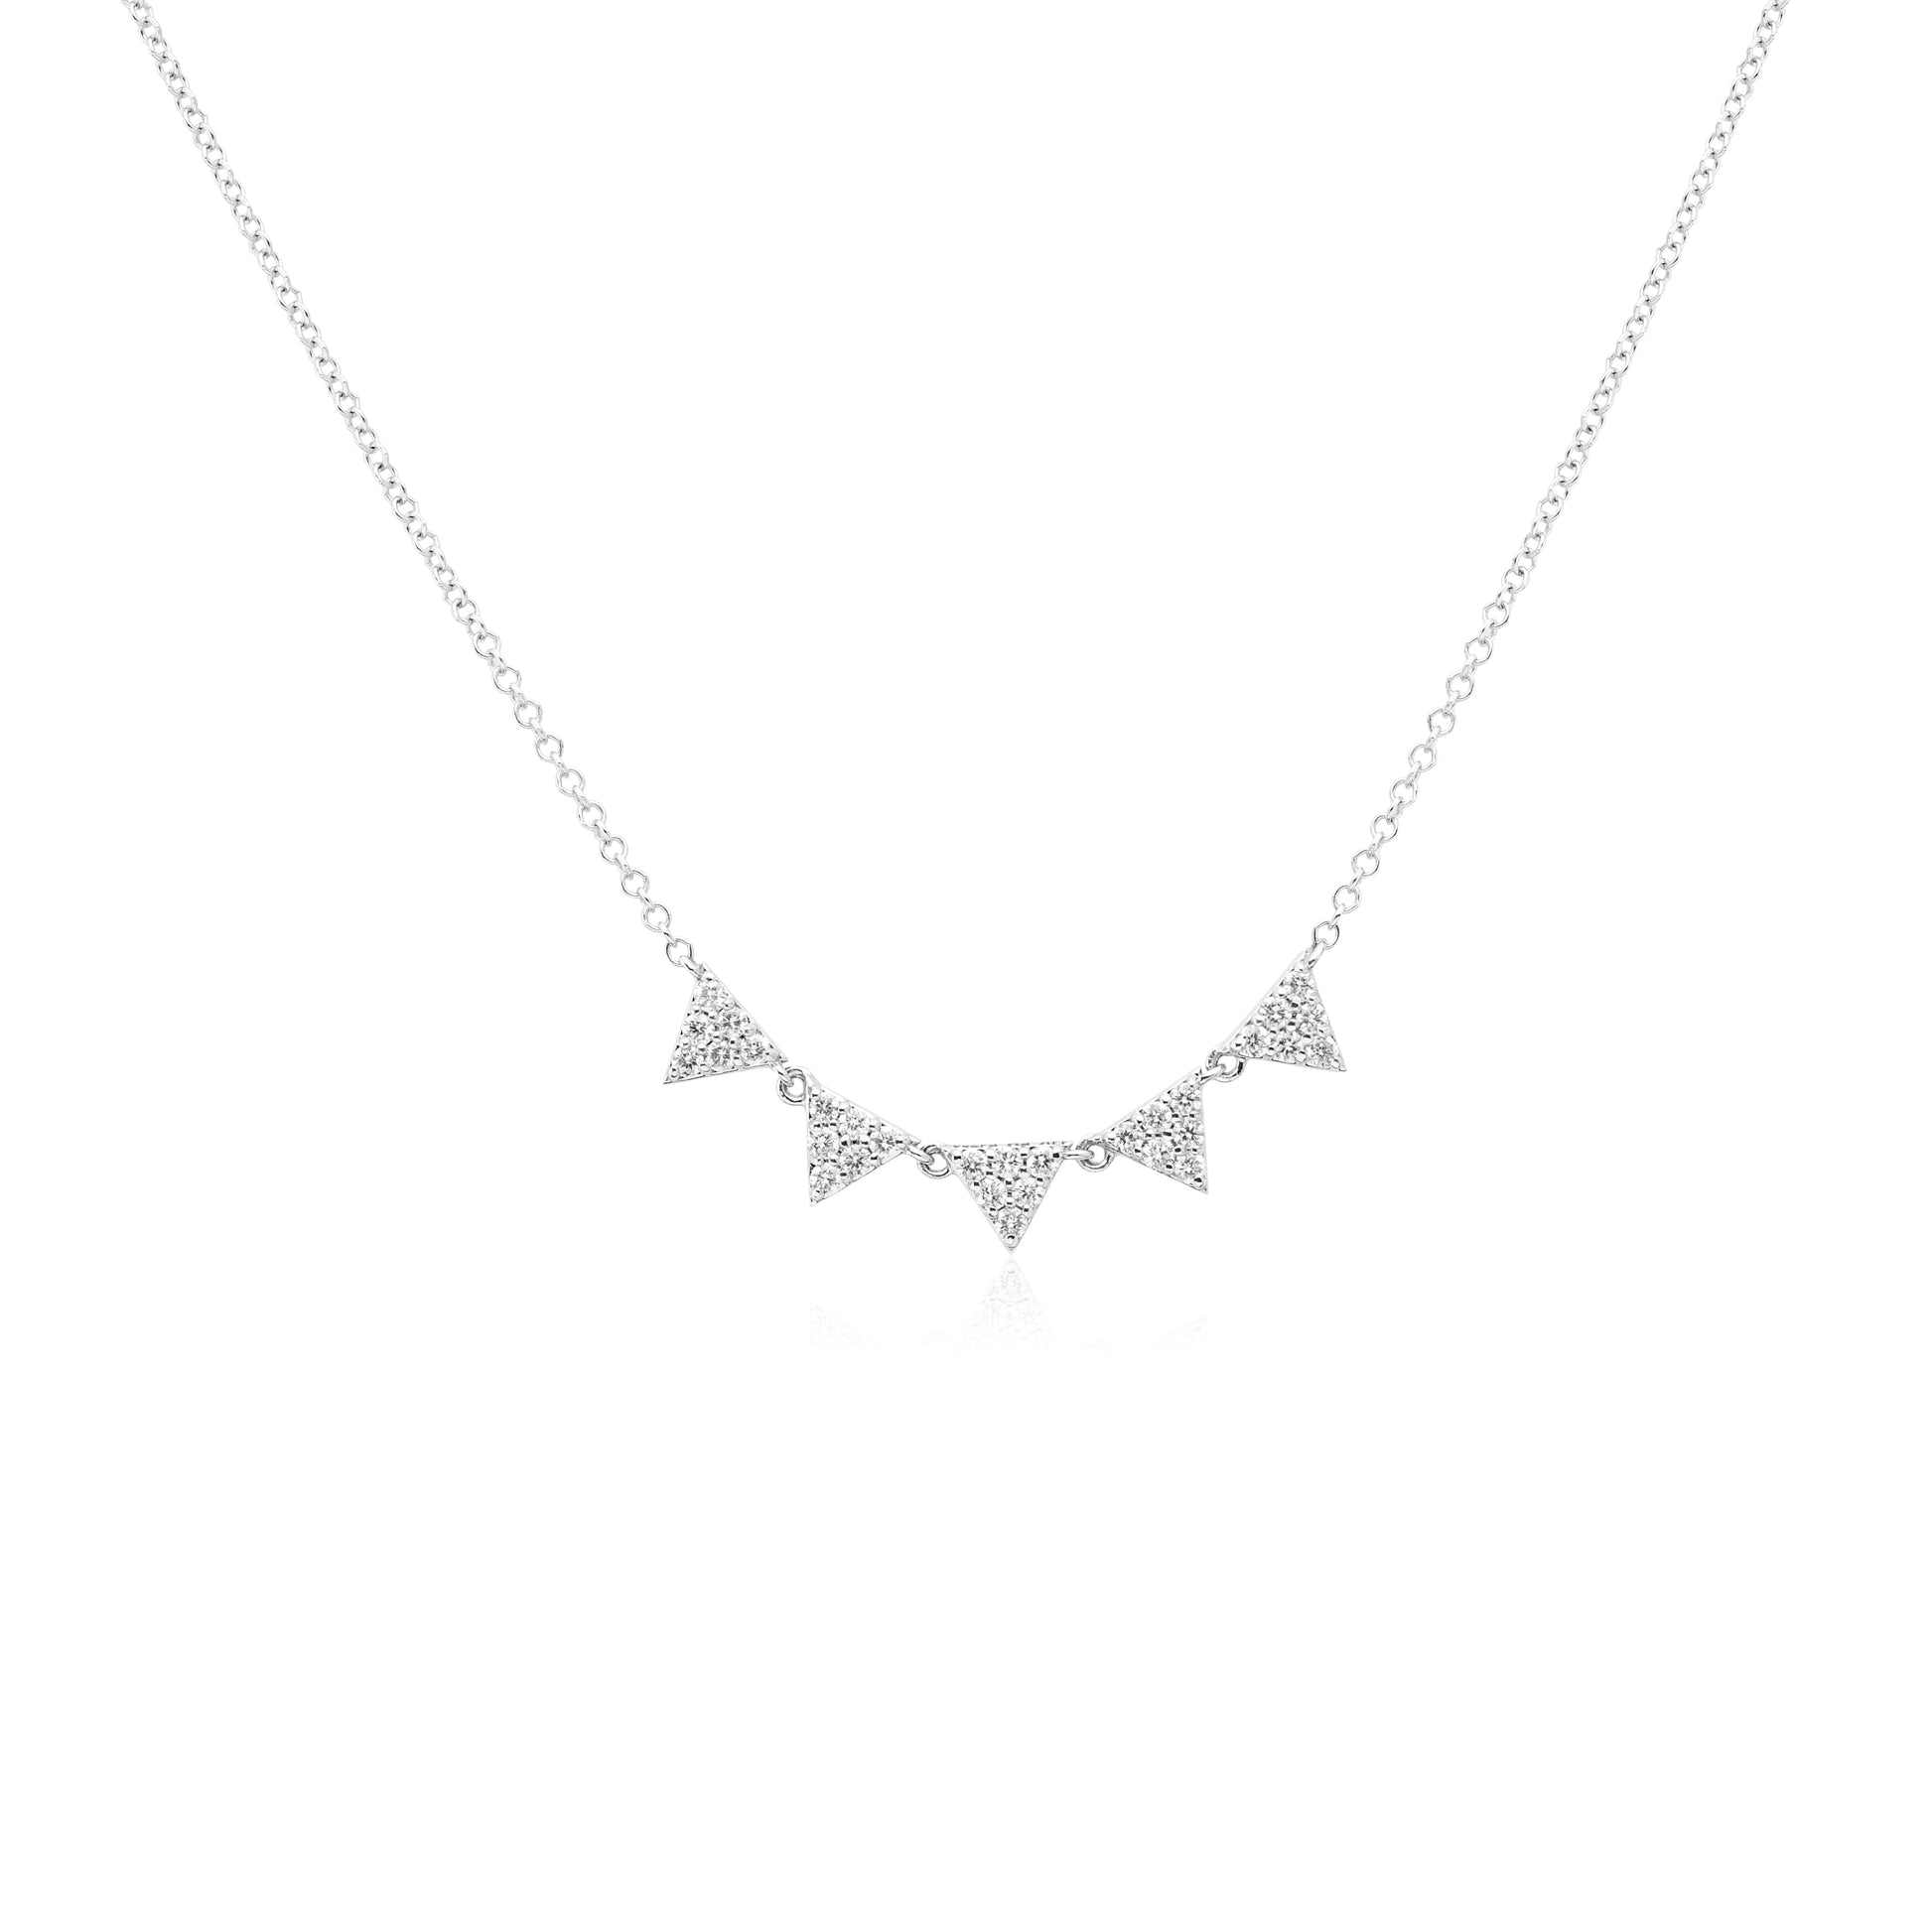 White Gold Necklaces 14k White Gold Hanging Triangle Pendant dansonjewelers Danson Jewelers 